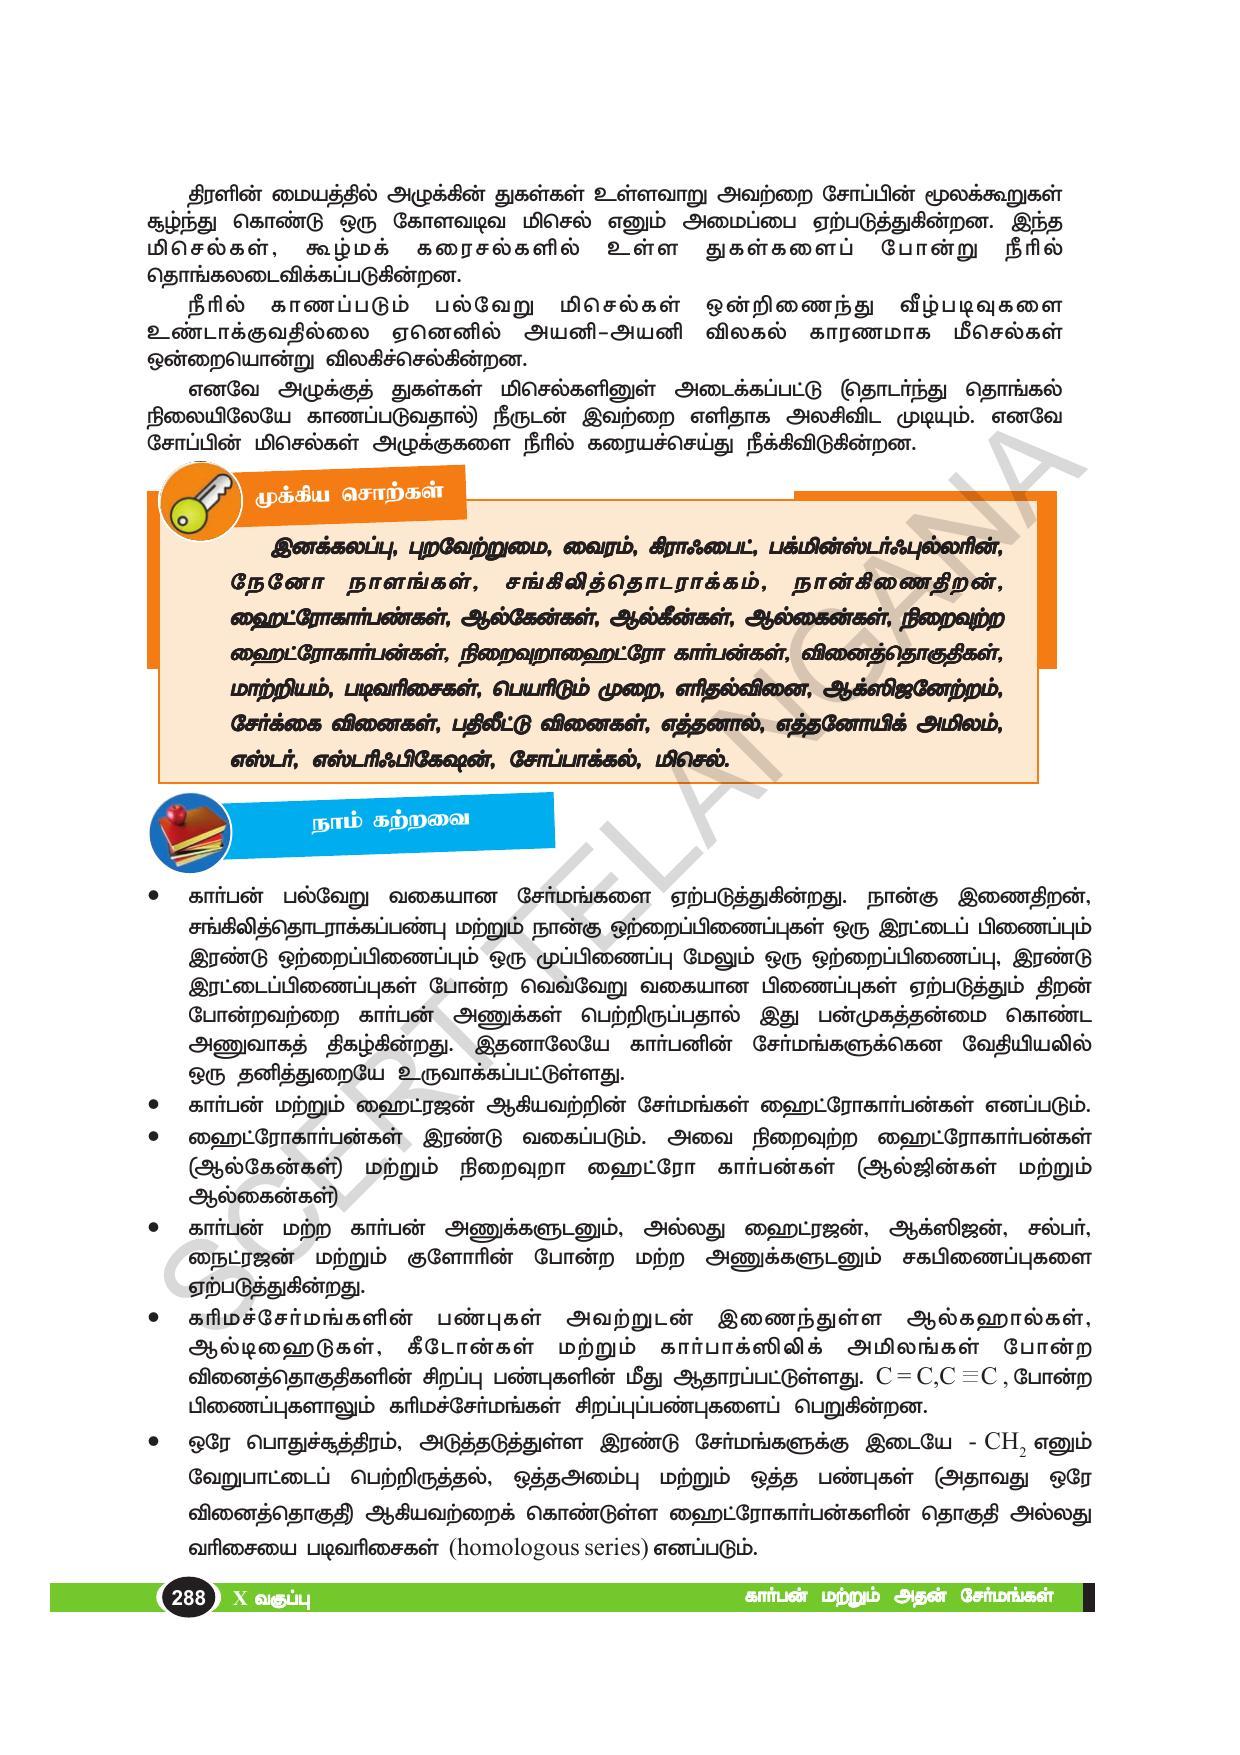 TS SCERT Class 10 Physical Science(Tamil Medium) Text Book - Page 300